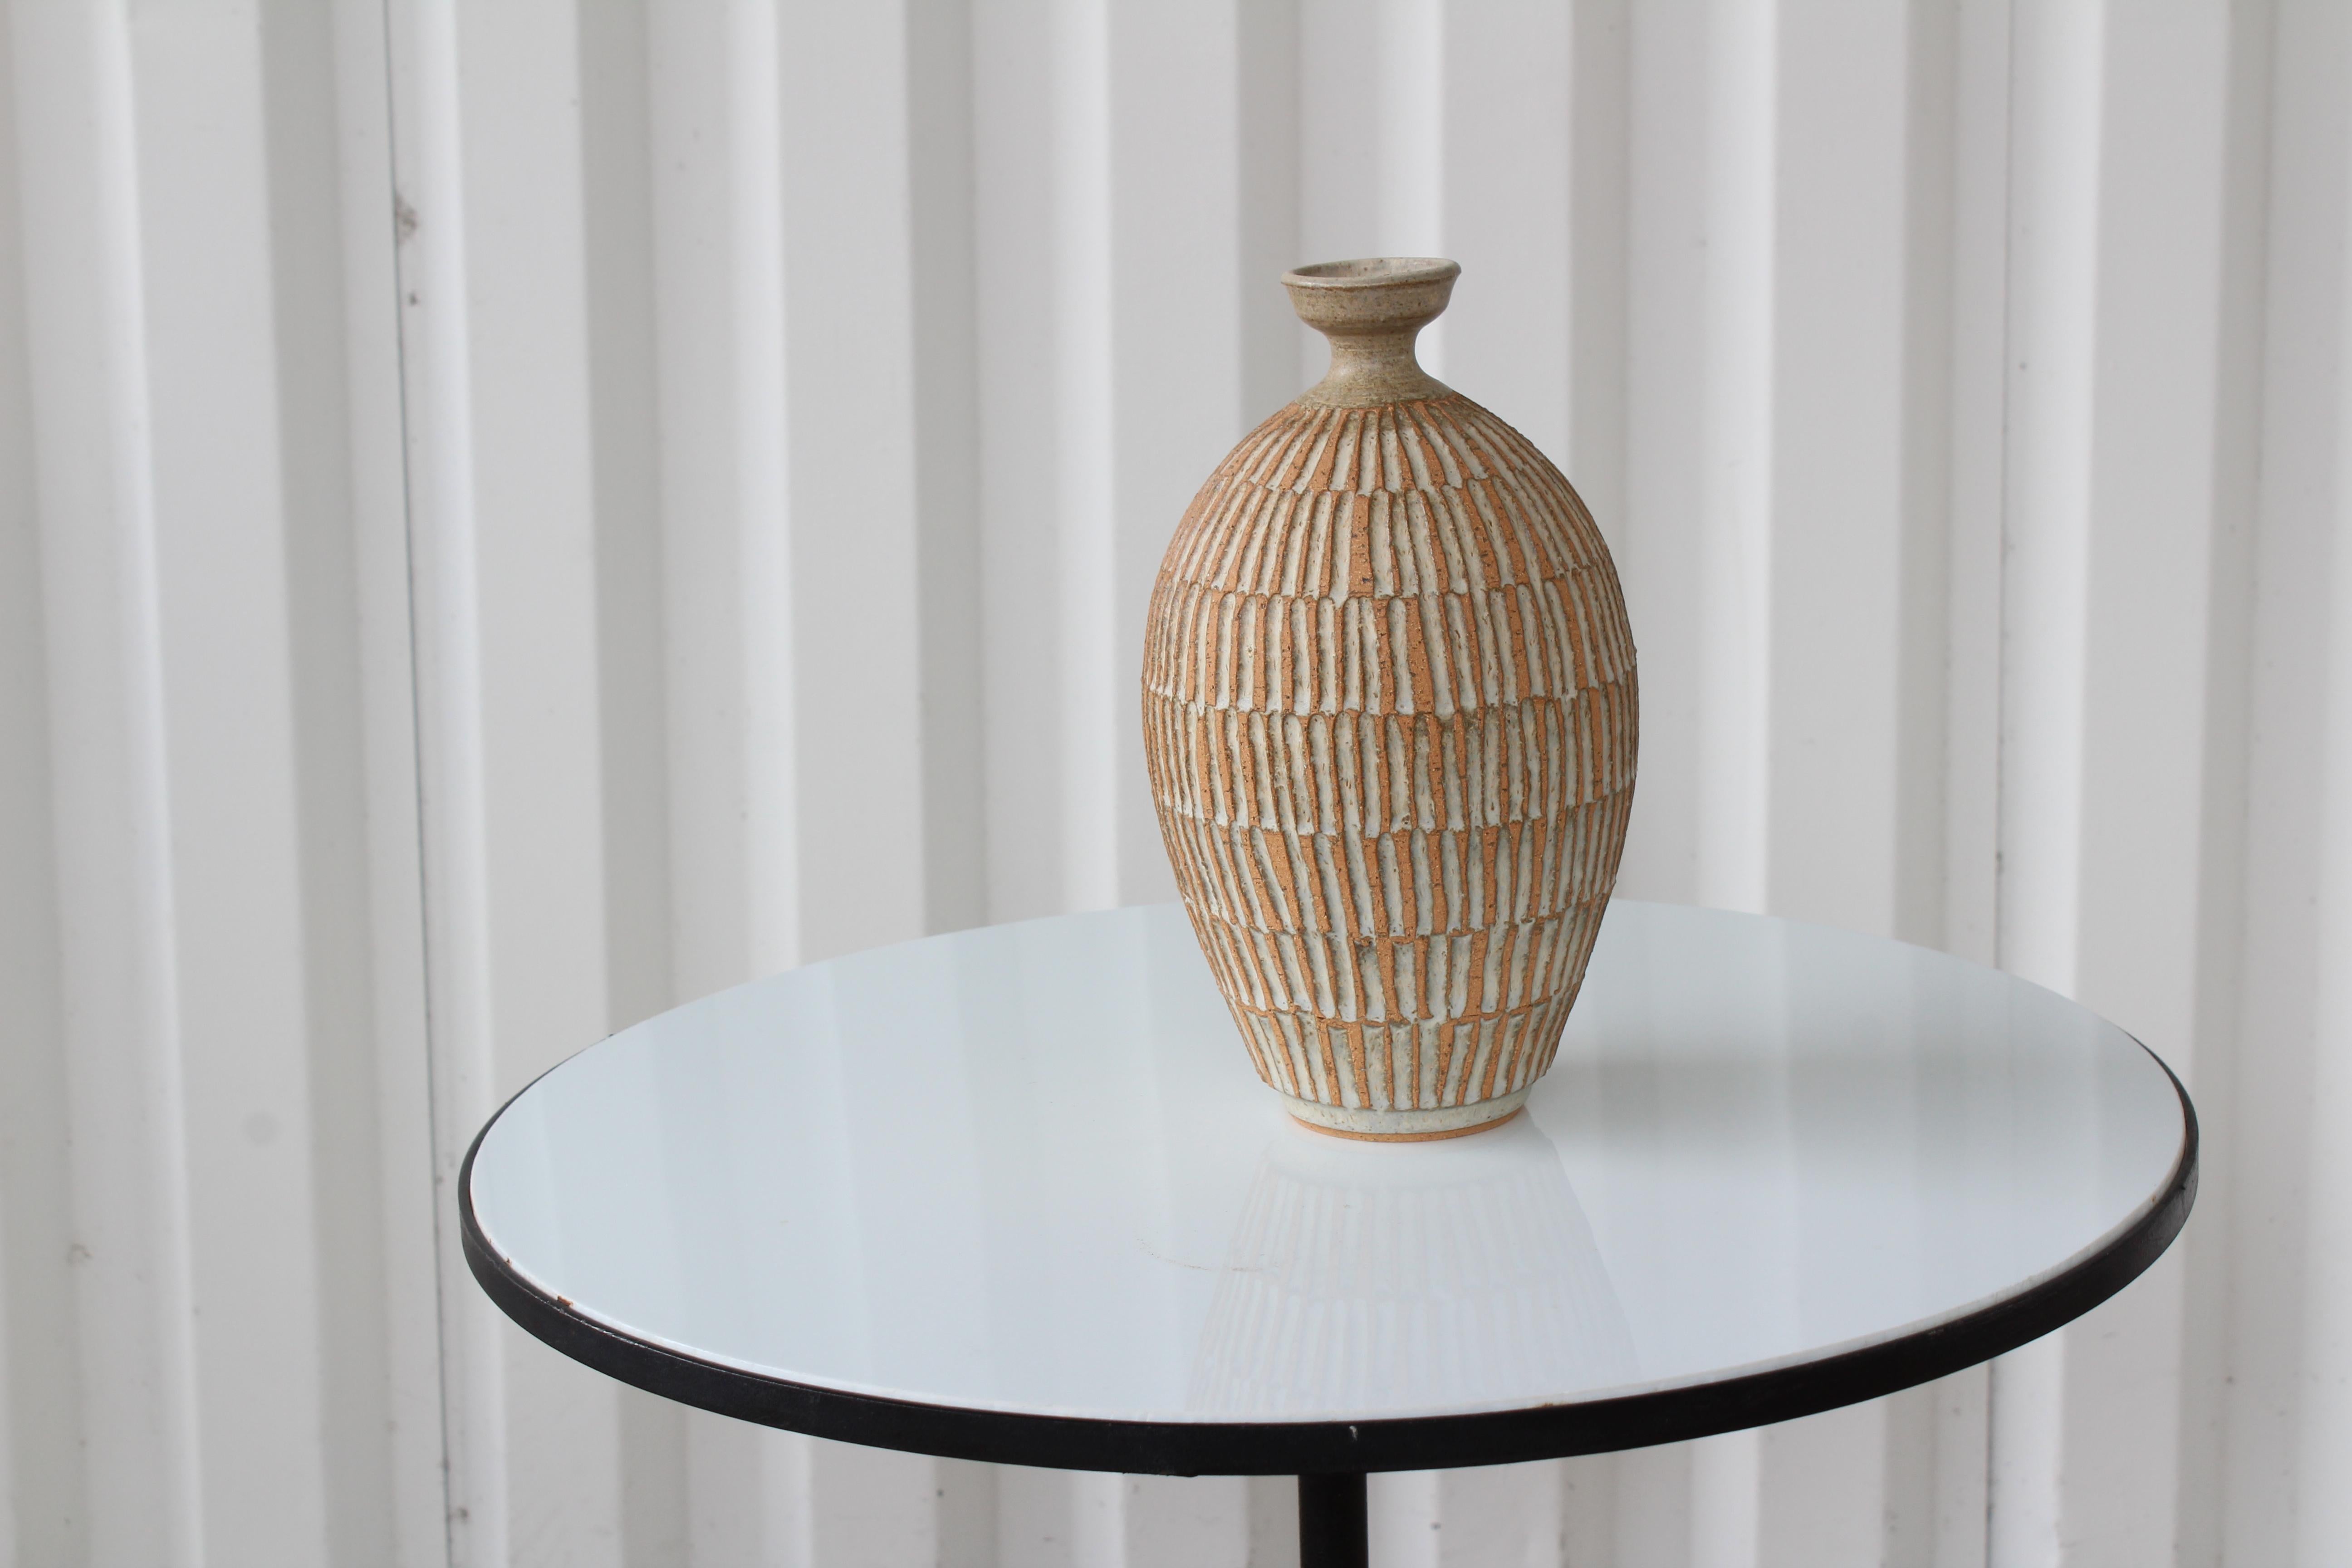 Mid-20th Century Studio Pottery Vase by Frank Willet for Willet Studio, U.S.A, 1960s